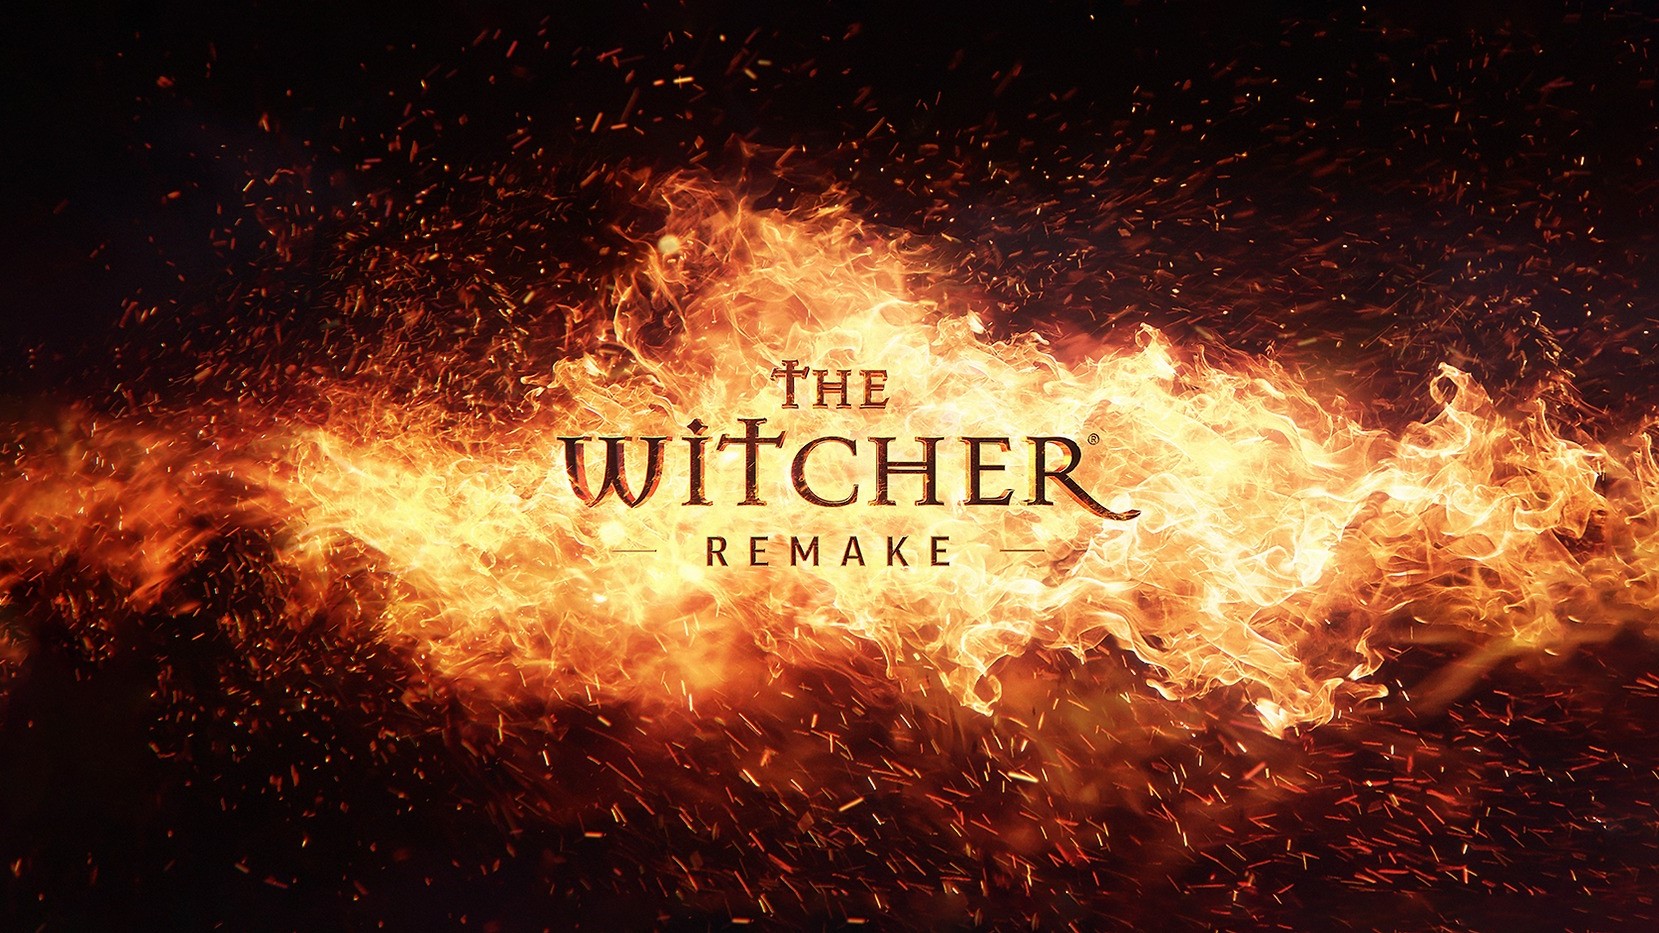 The Witcher 4 release date speculation, latest news and rumours